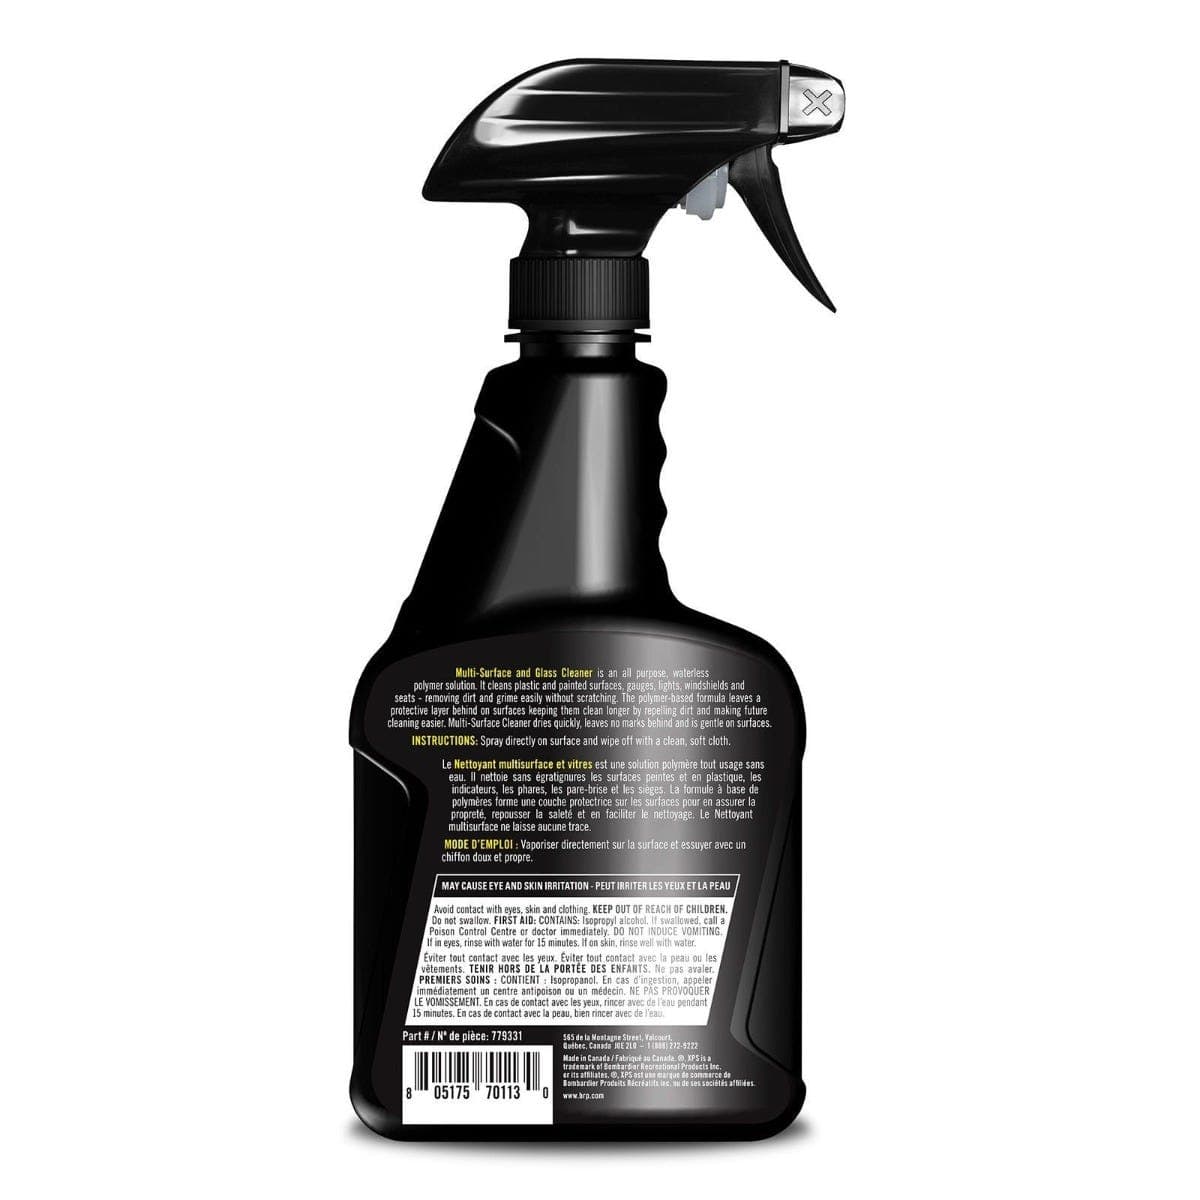 Multi-surface And Glass Cleaner